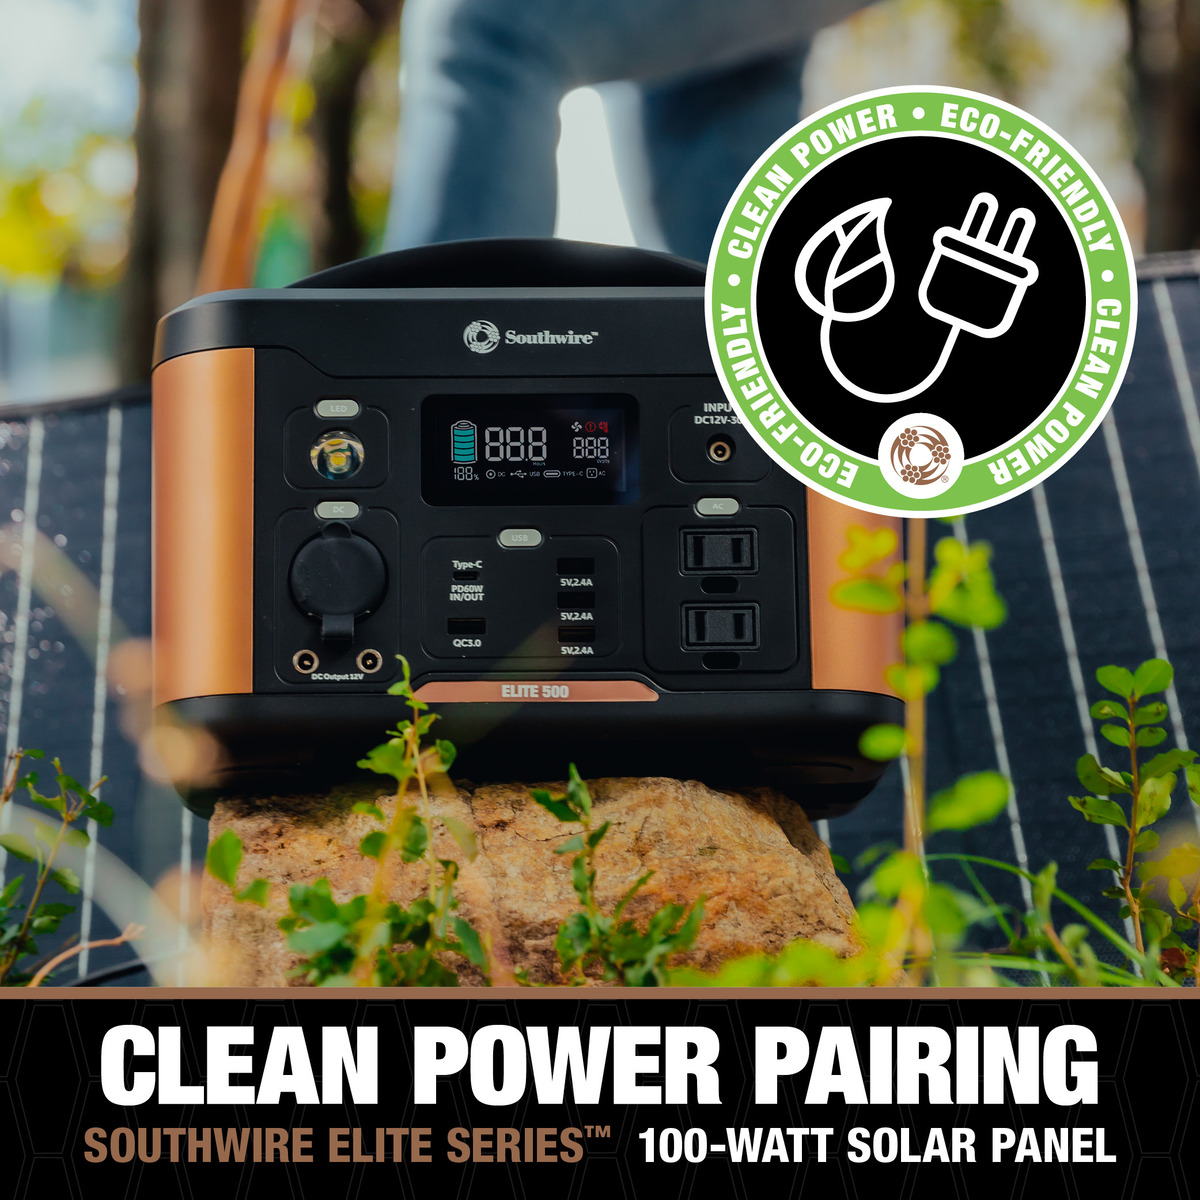 PORTABLE POWER STATION 500 WITH 515 WATT-HOURS OF POWER, FEATURES PURE SINE WAVE, 5 USB PORTS, 2 AC OUTLETS, 12V DC OUTLET. MOLDED HANDLE AND 11.46 LBS